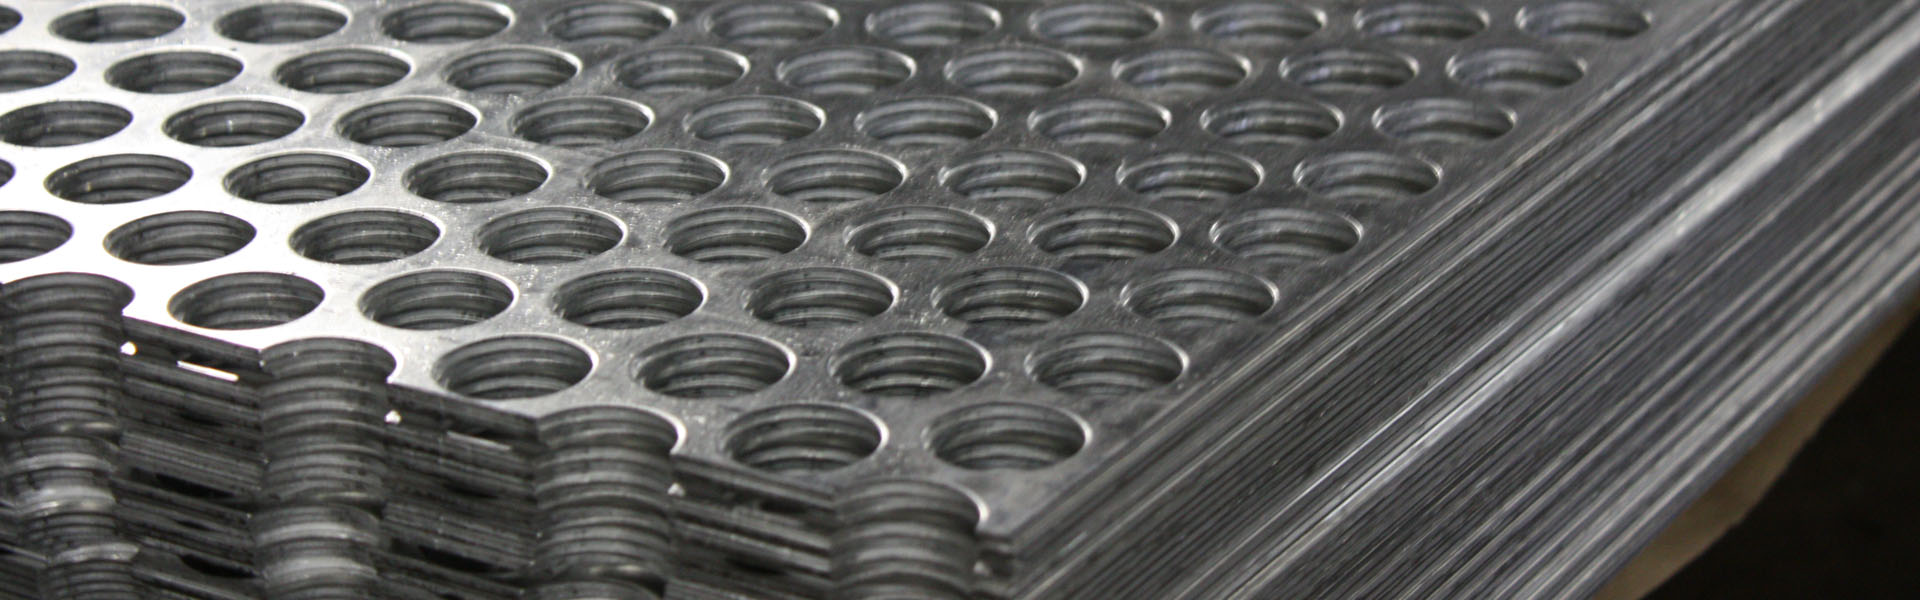 Perforated Steel Sheets-Excellent Construction Material